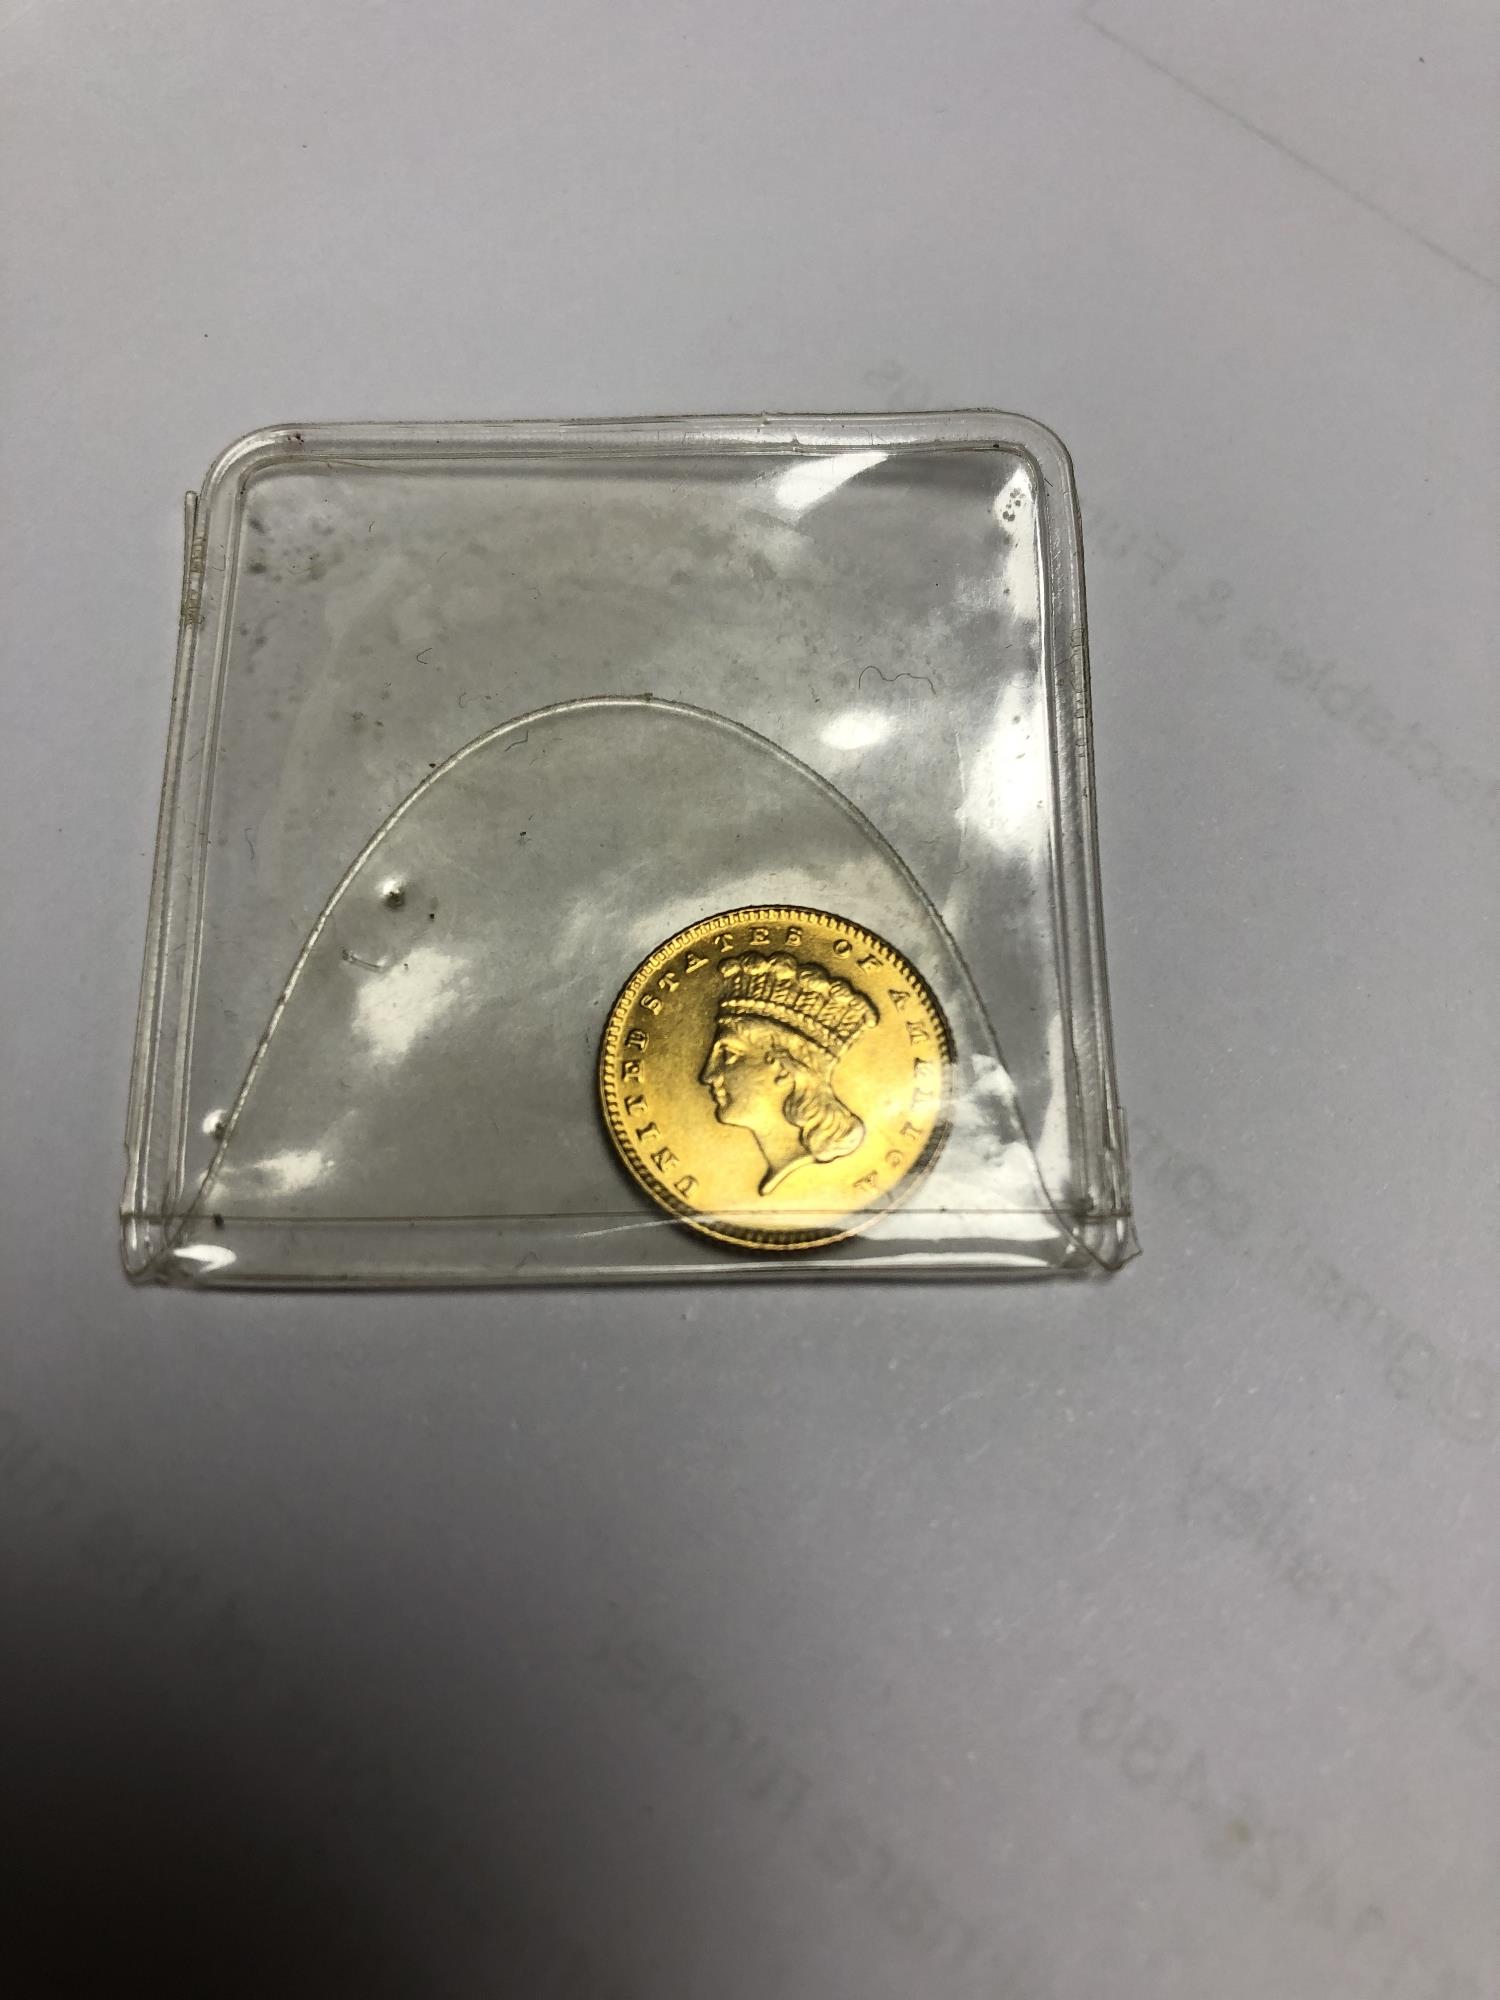 An American gold $1 coin 1862 - Image 2 of 3